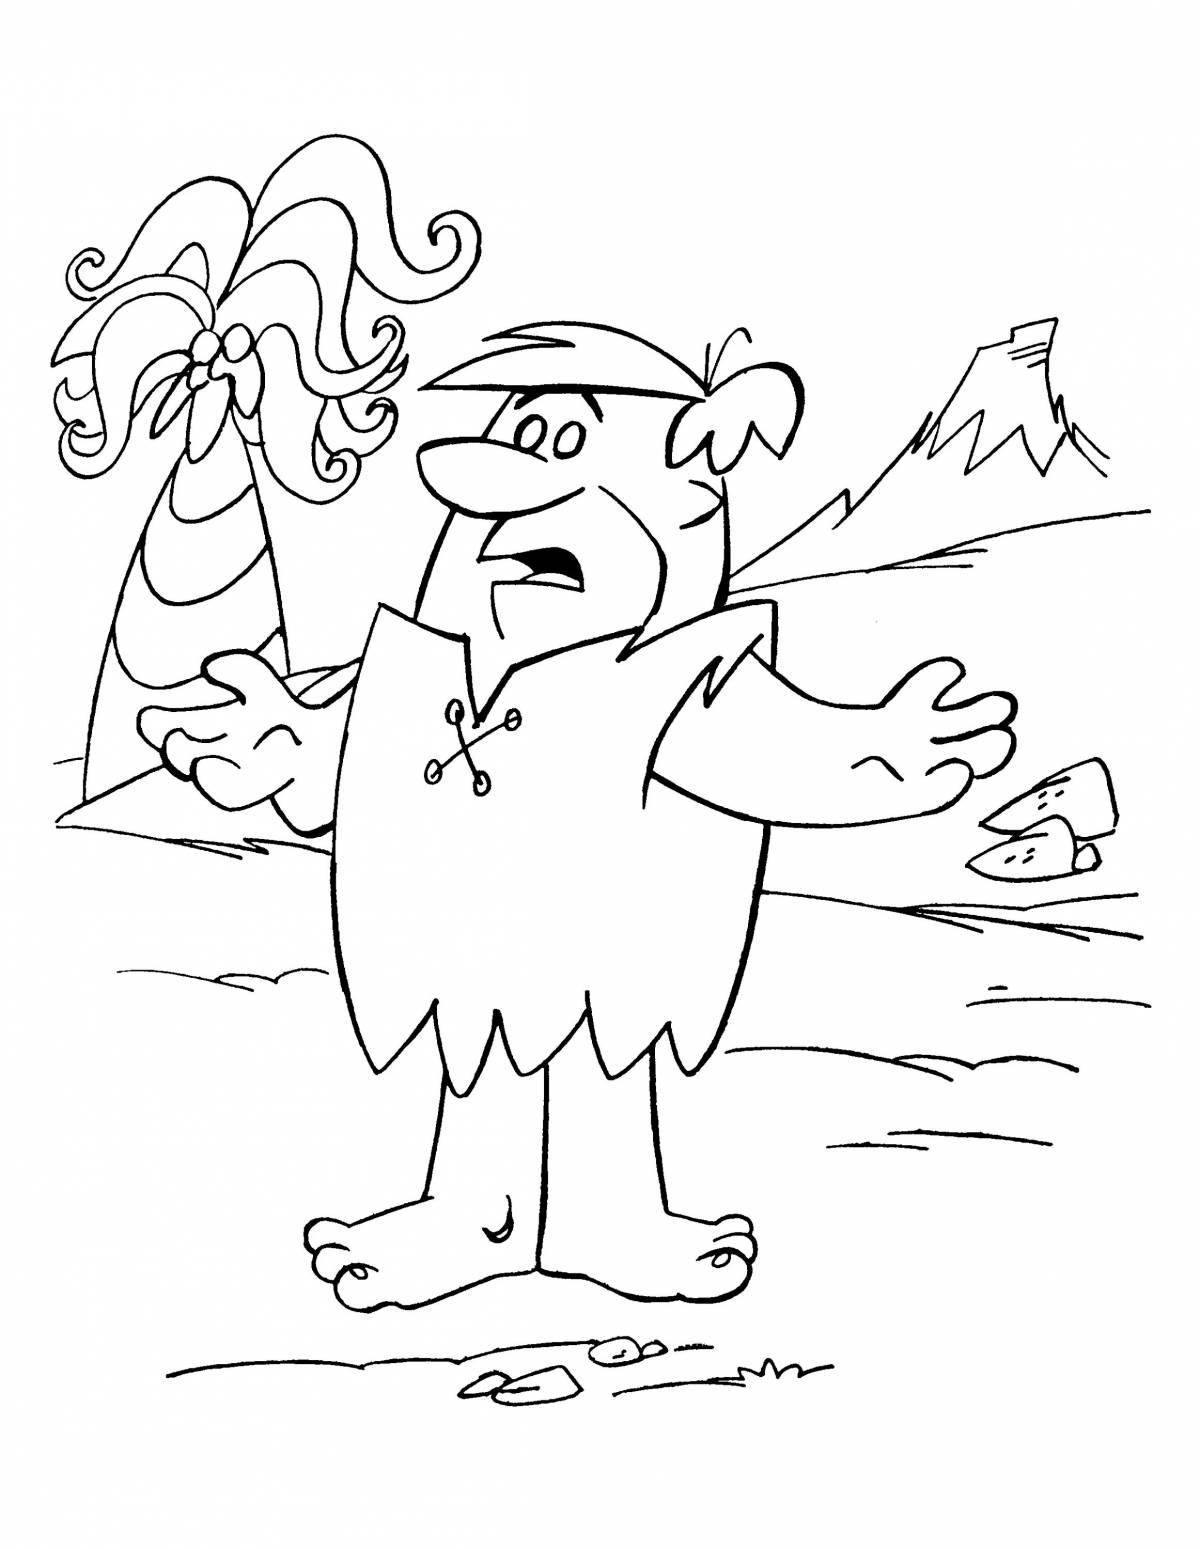 Fred flintstone's incredible coloring book